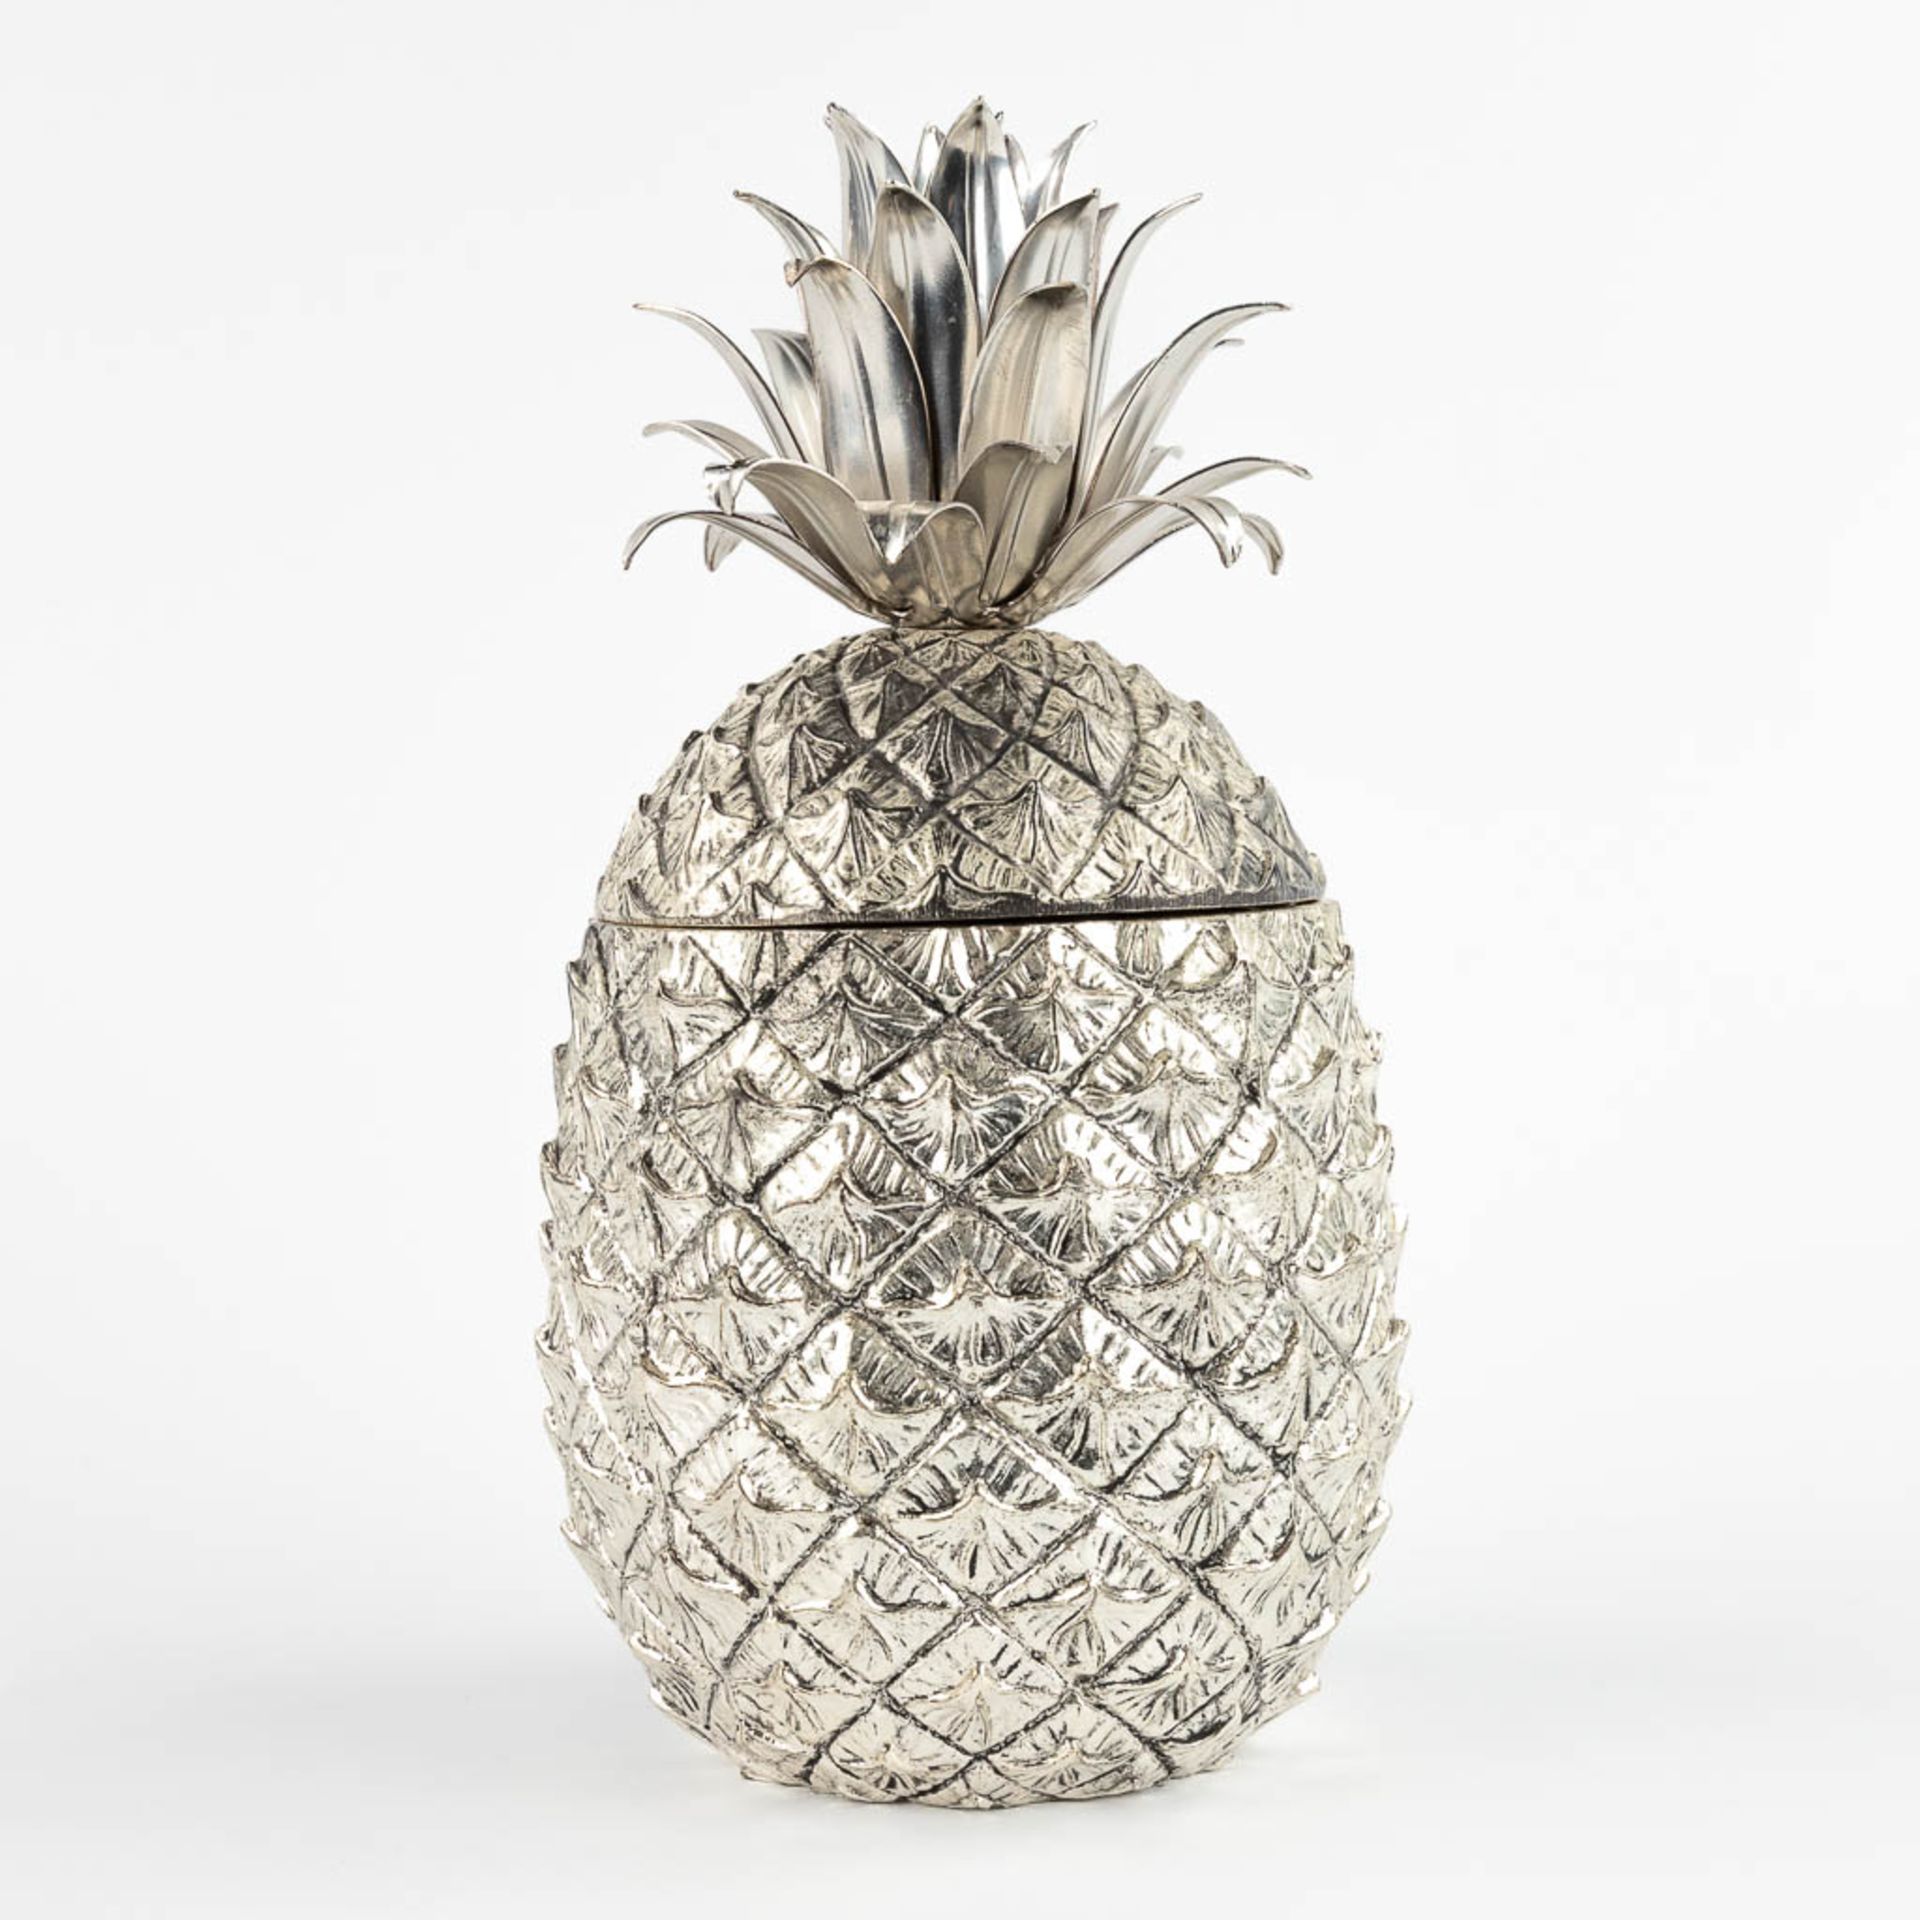 Mauro MANETTI (1946) 'Pineapple' an ice pail. (H:26 x D:14 cm) - Image 7 of 13